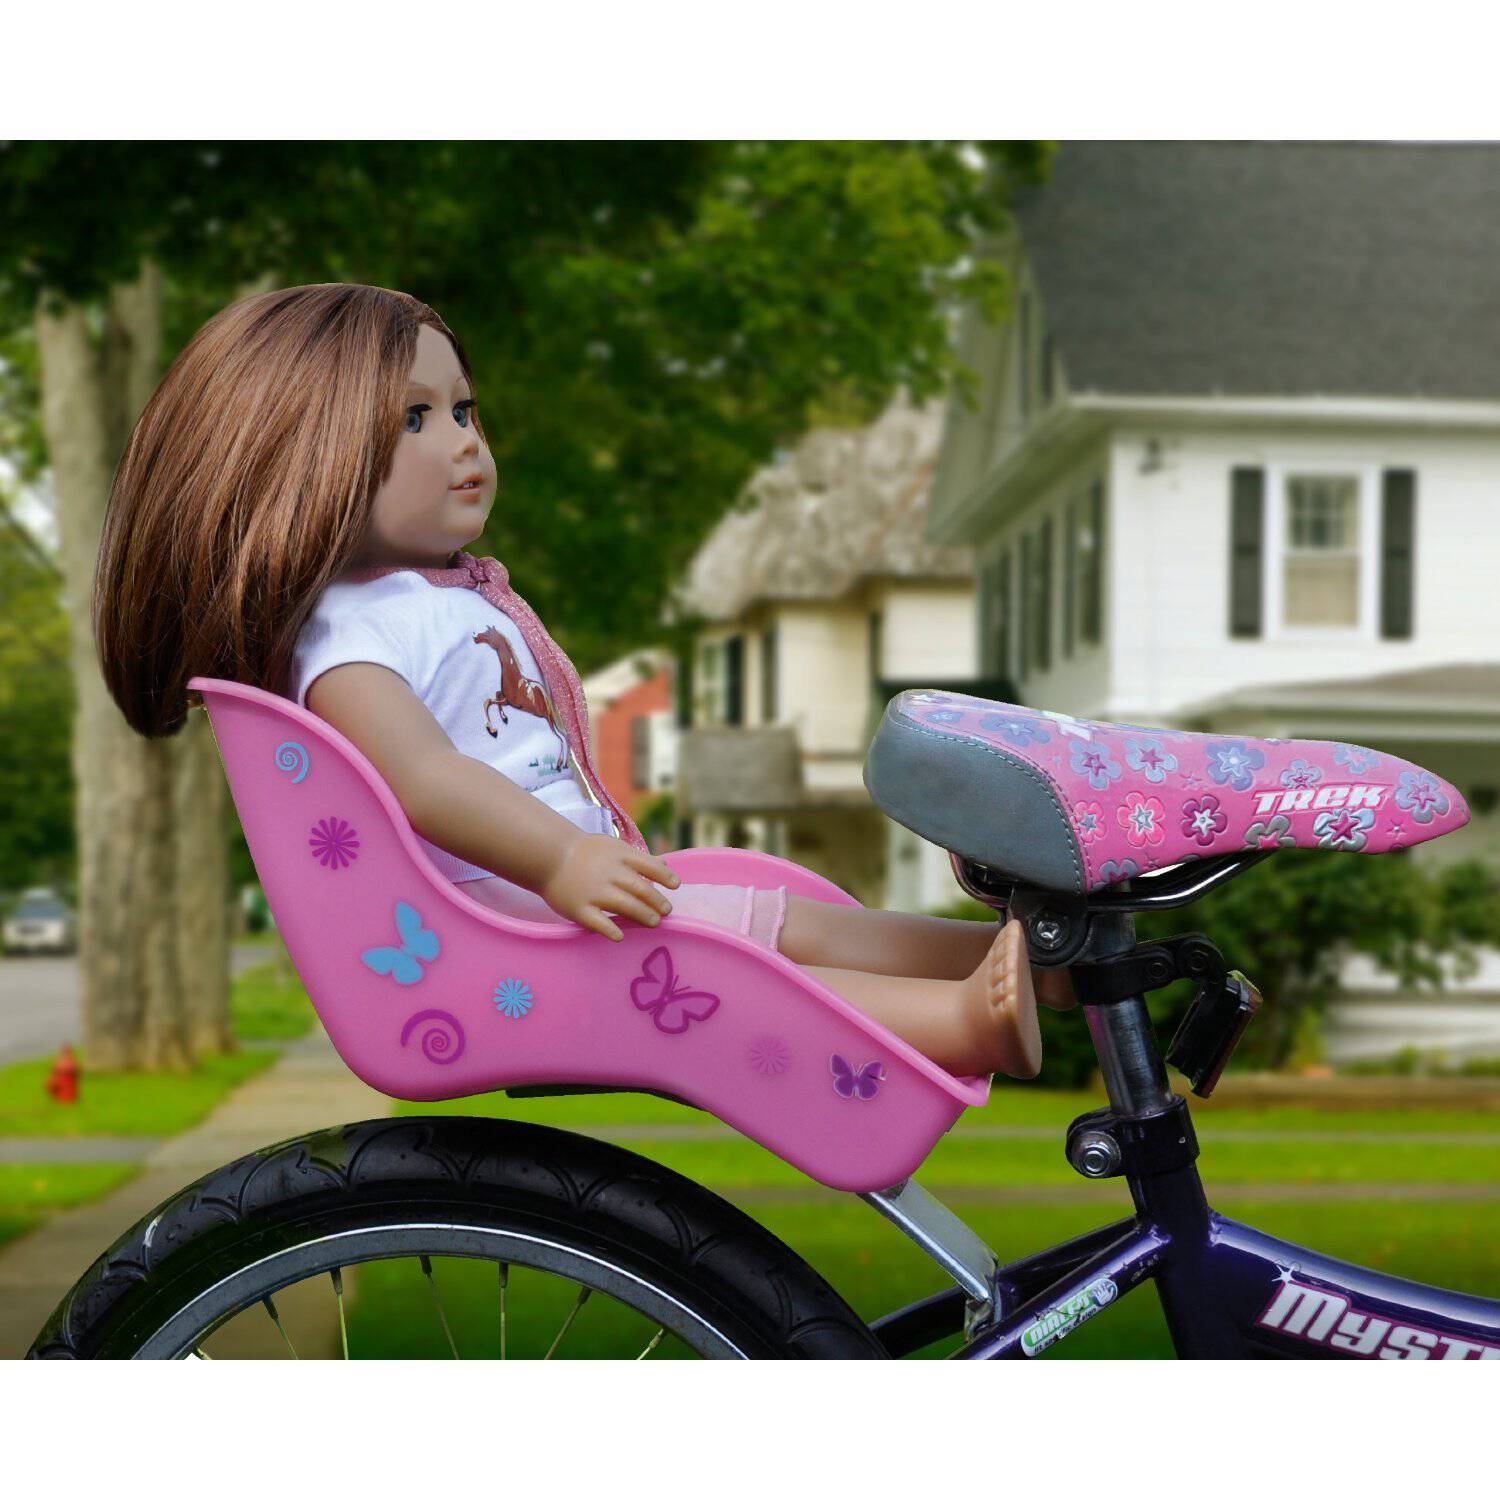 bike seat for a doll